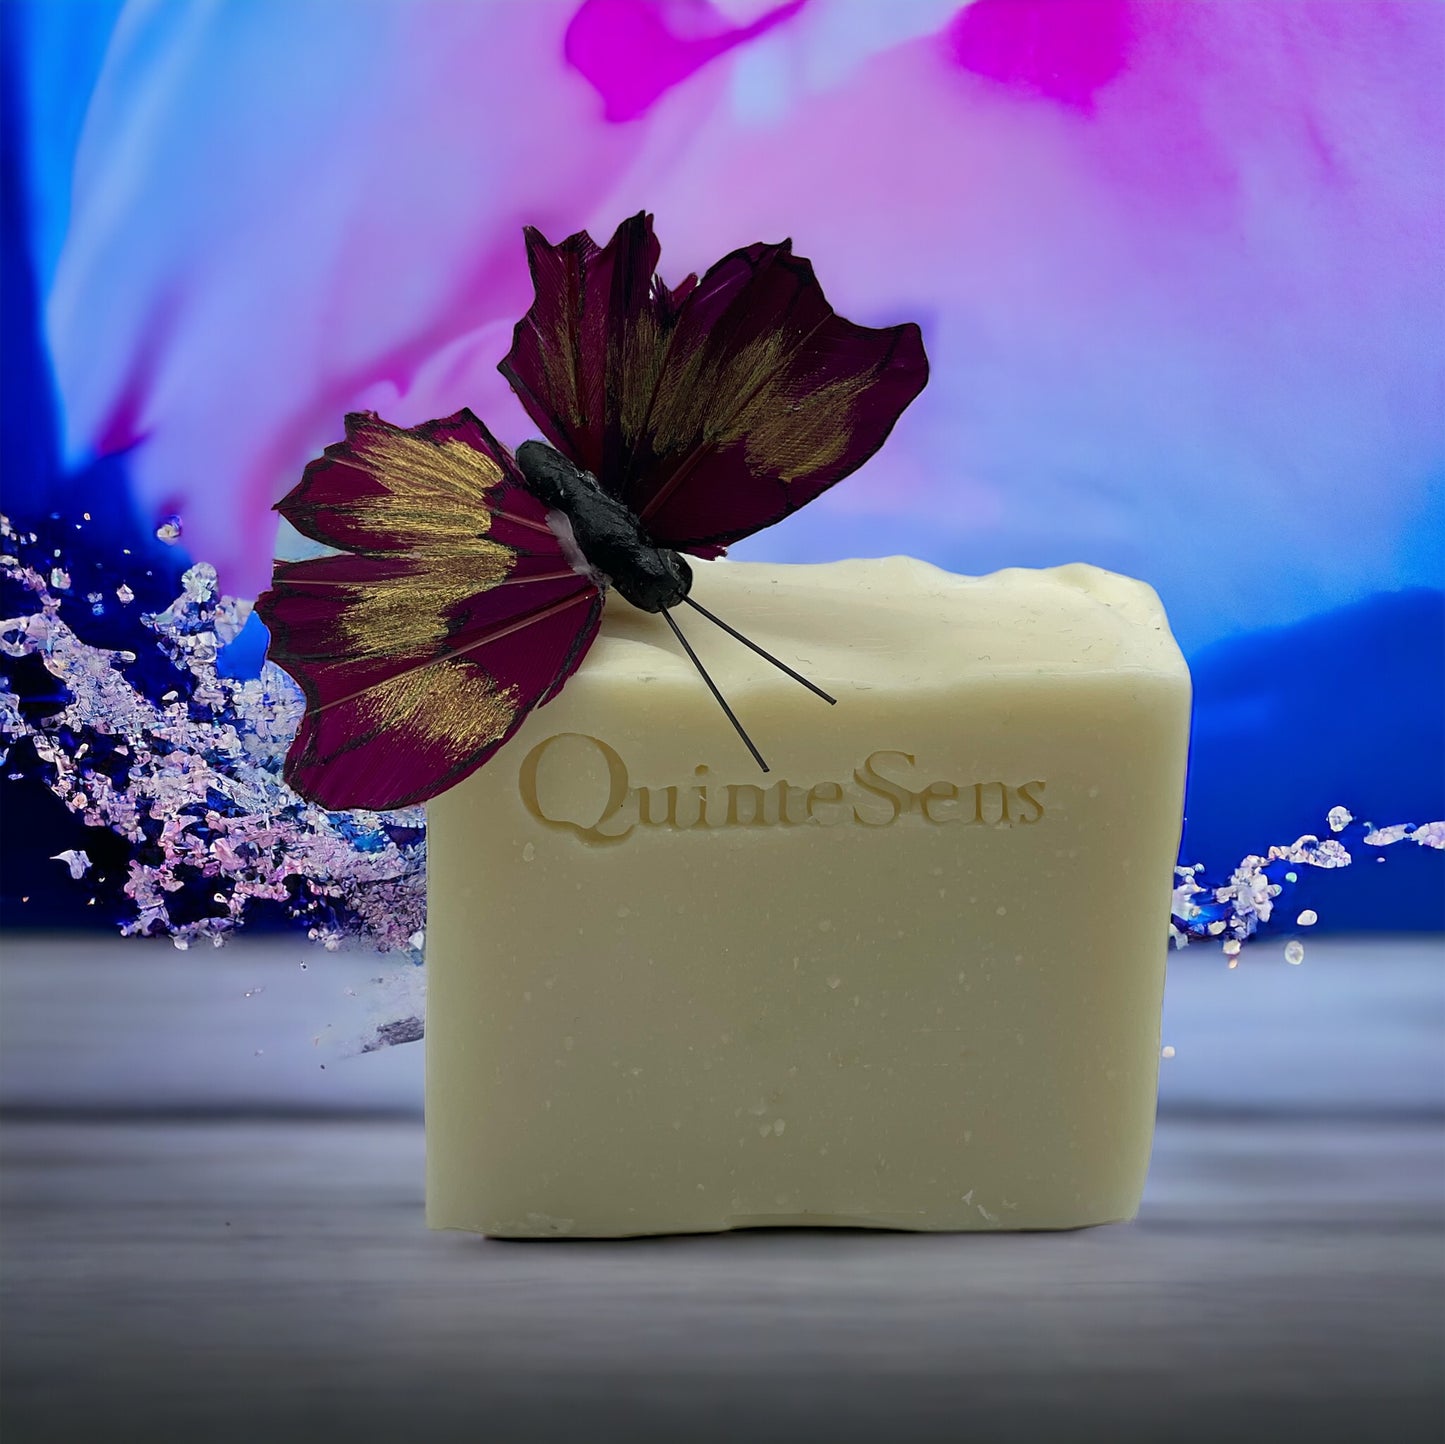 Cleopatra Soap: the Quintessence for your skin